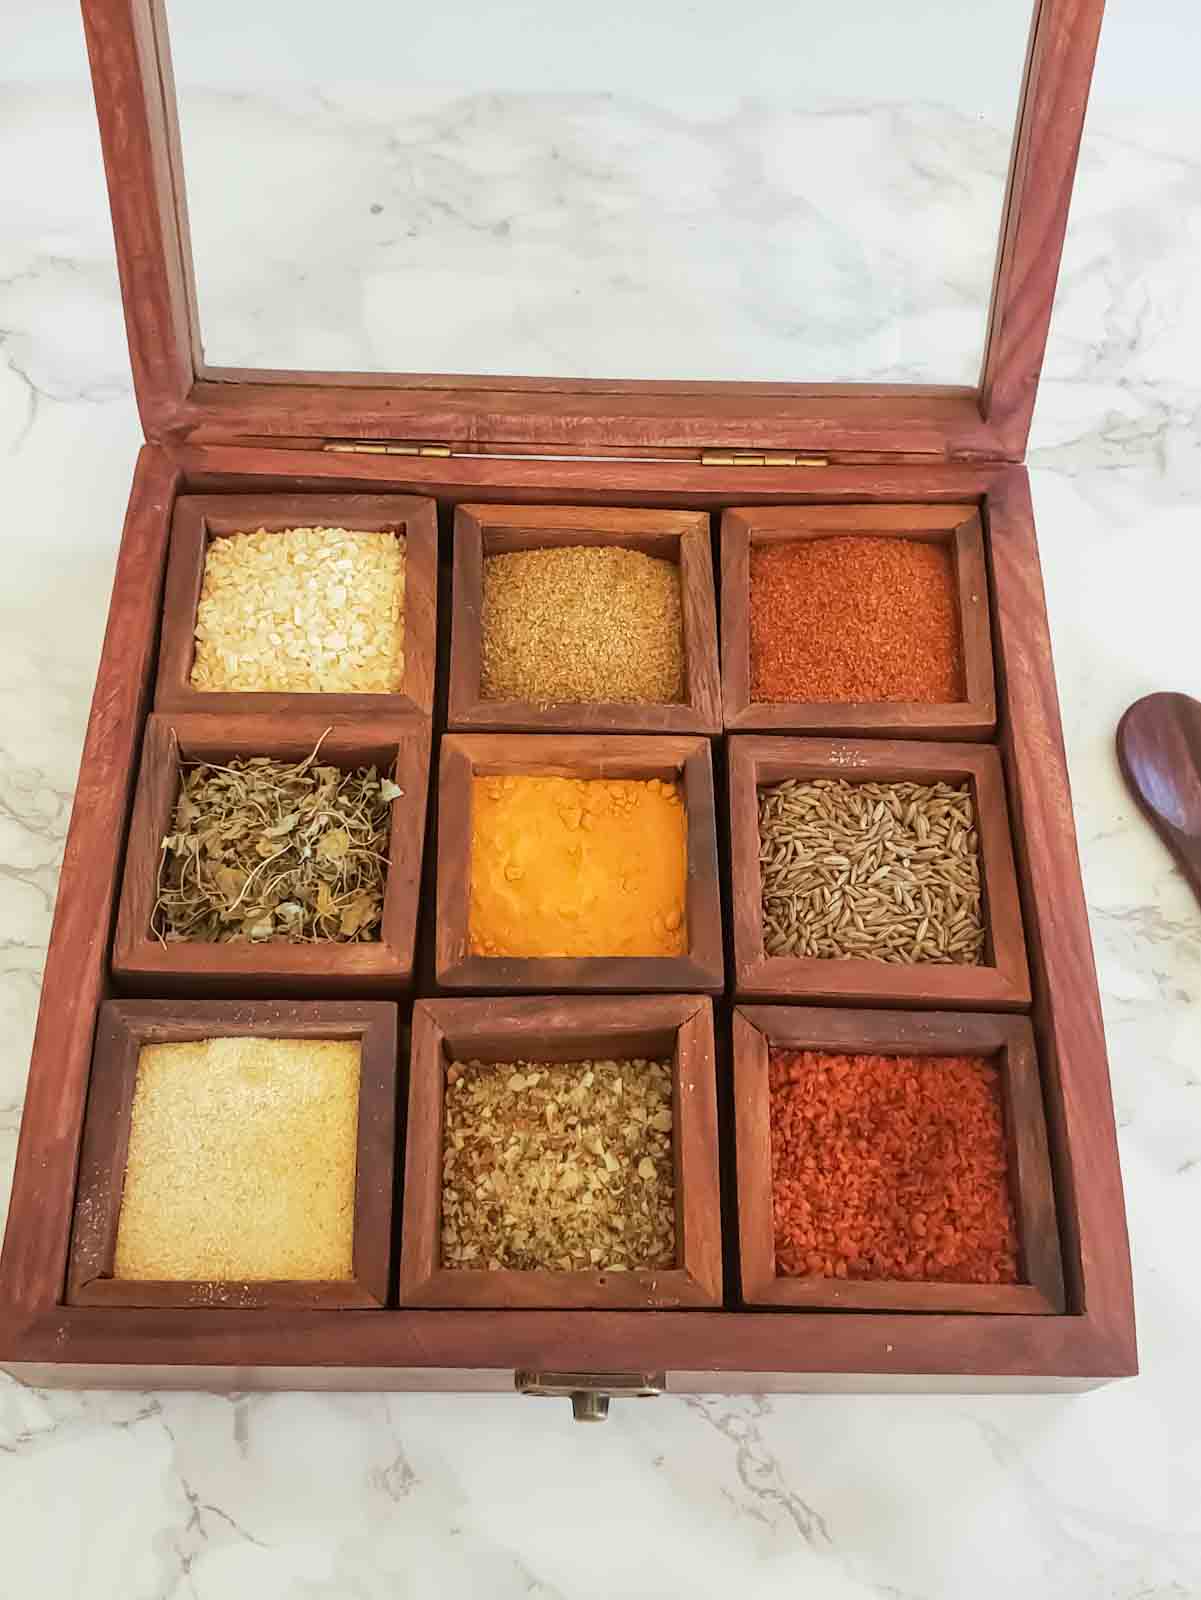 Curry Powder Substitutes in an Indian Spice Box.